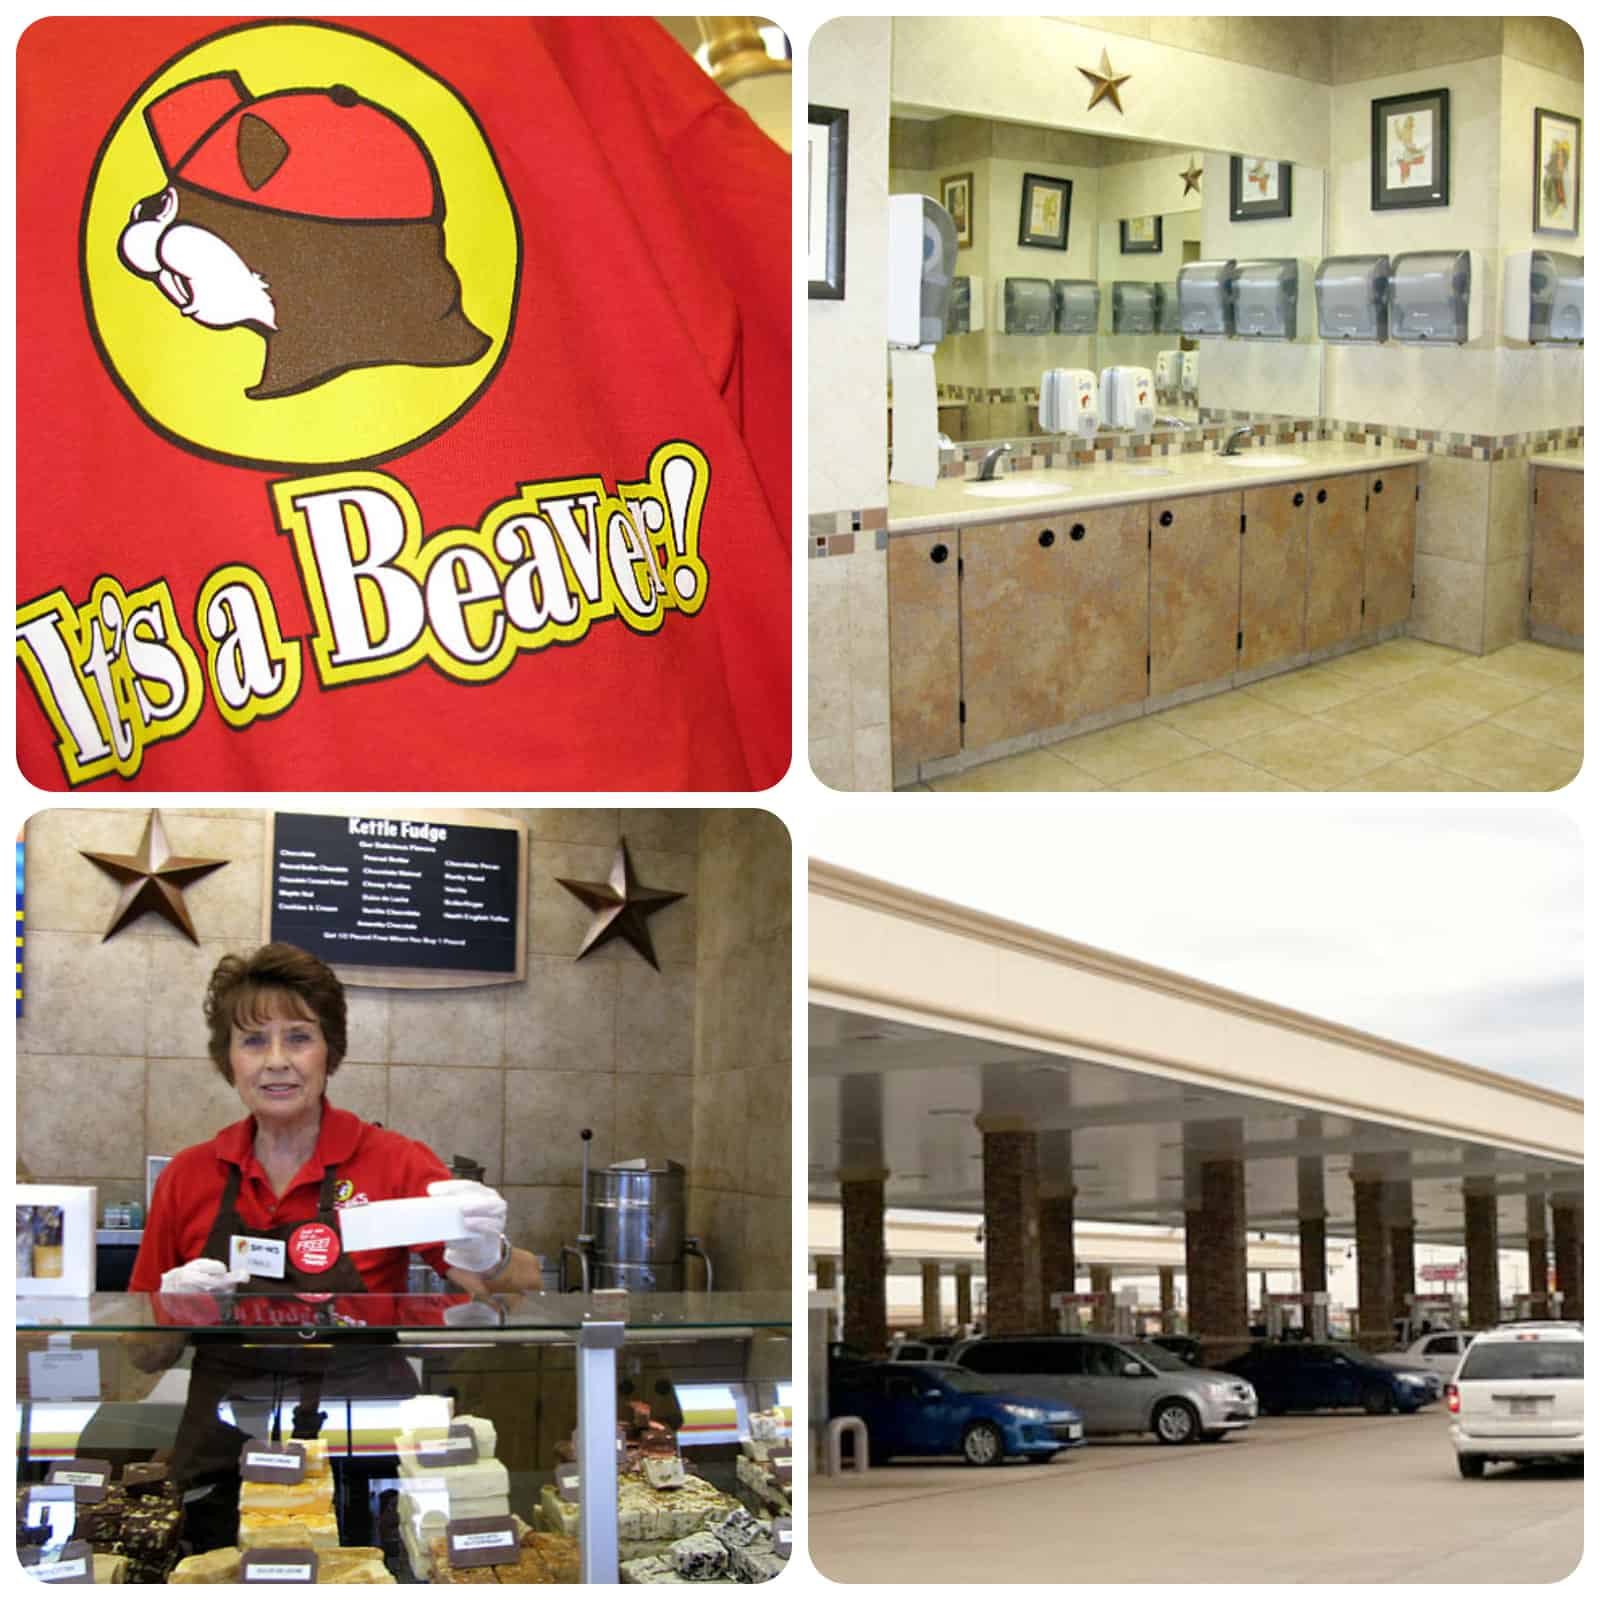 Buc-ee's is an appealing RV stop. (Images by @liveworkdream)